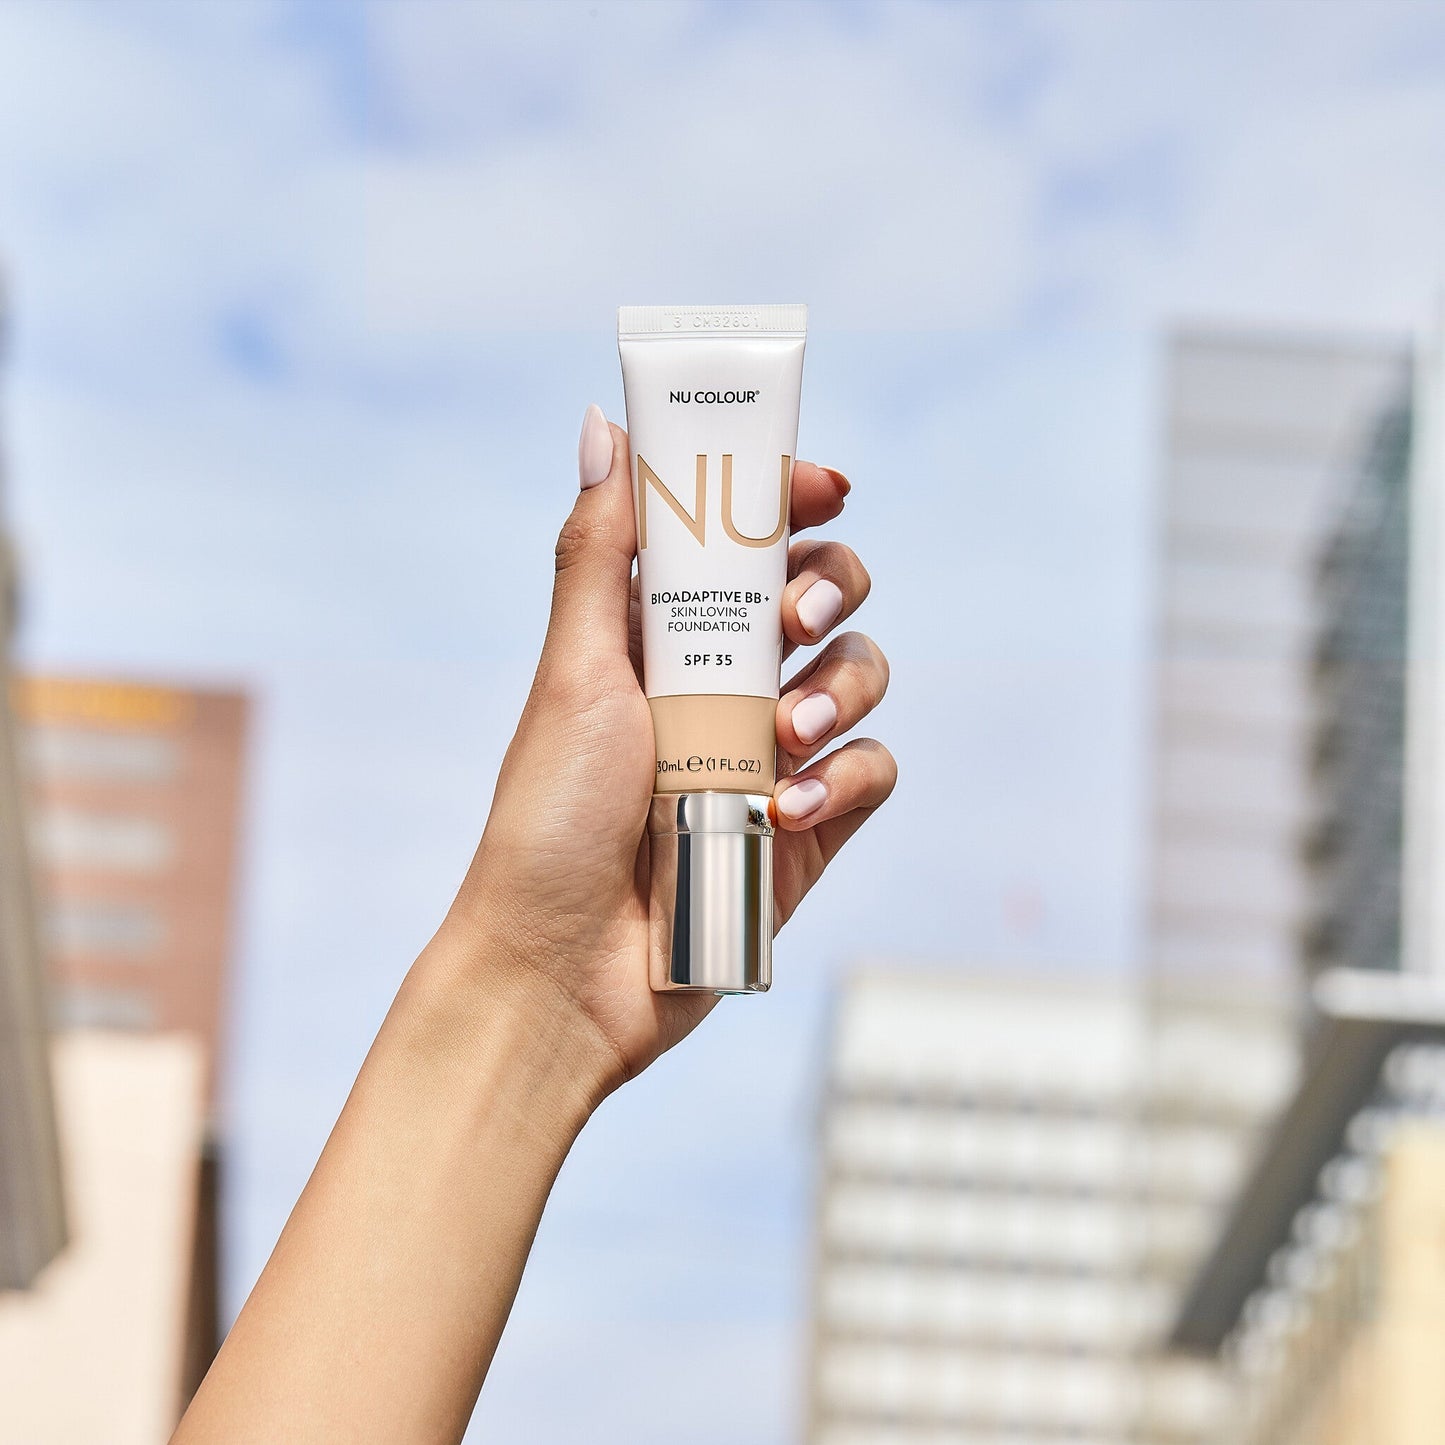 Nu Colour Bioadaptive BB+ Skin Loving Foundation $10 OFF ONLY 7 available at this price!